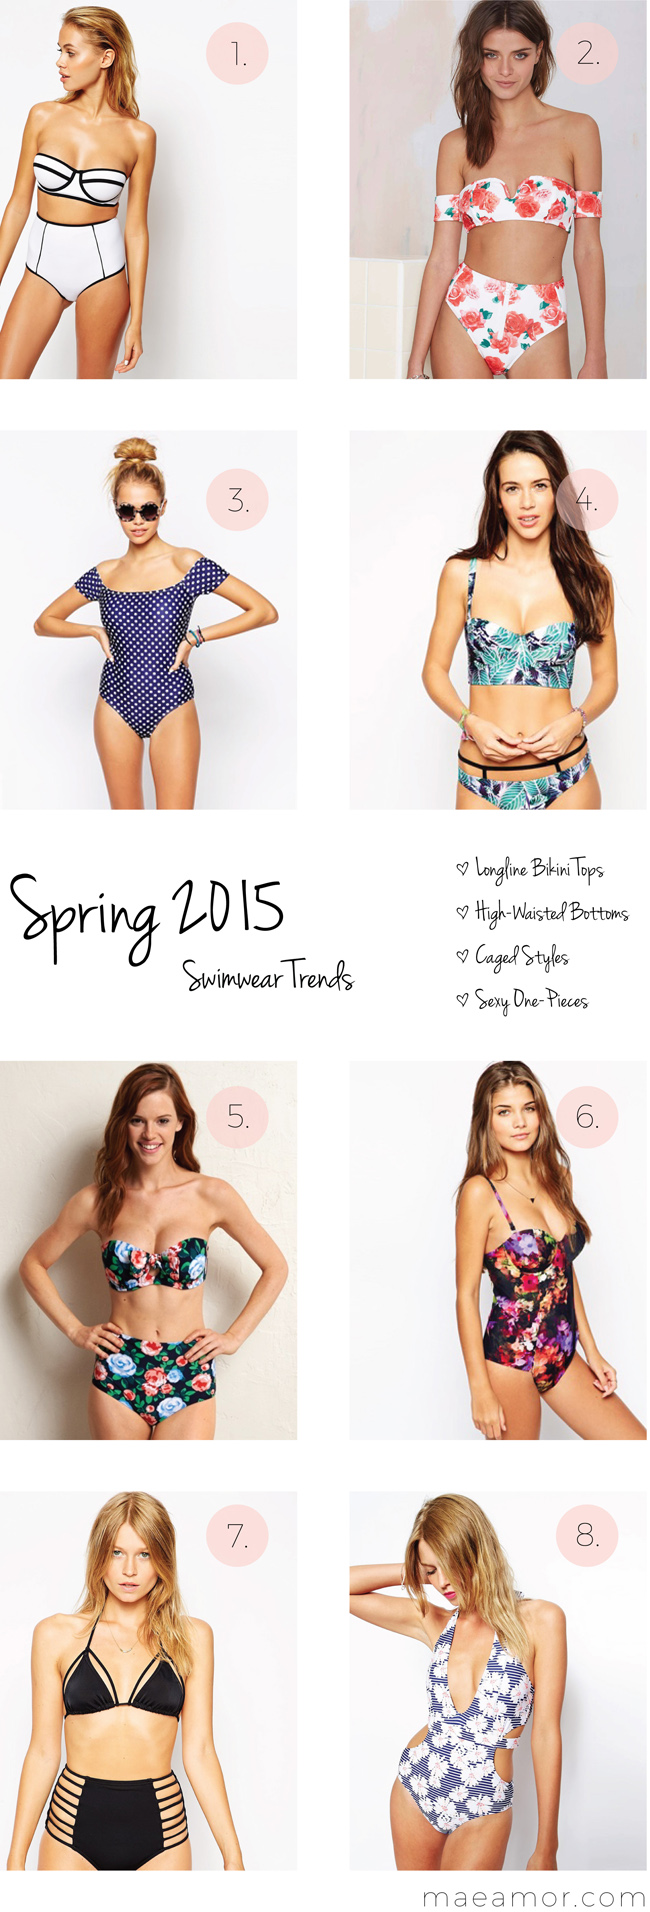 Spring 2015 Swimwear Trends: longline bikini tops, high-waisted bottoms, caged styles, sexy one-pieces